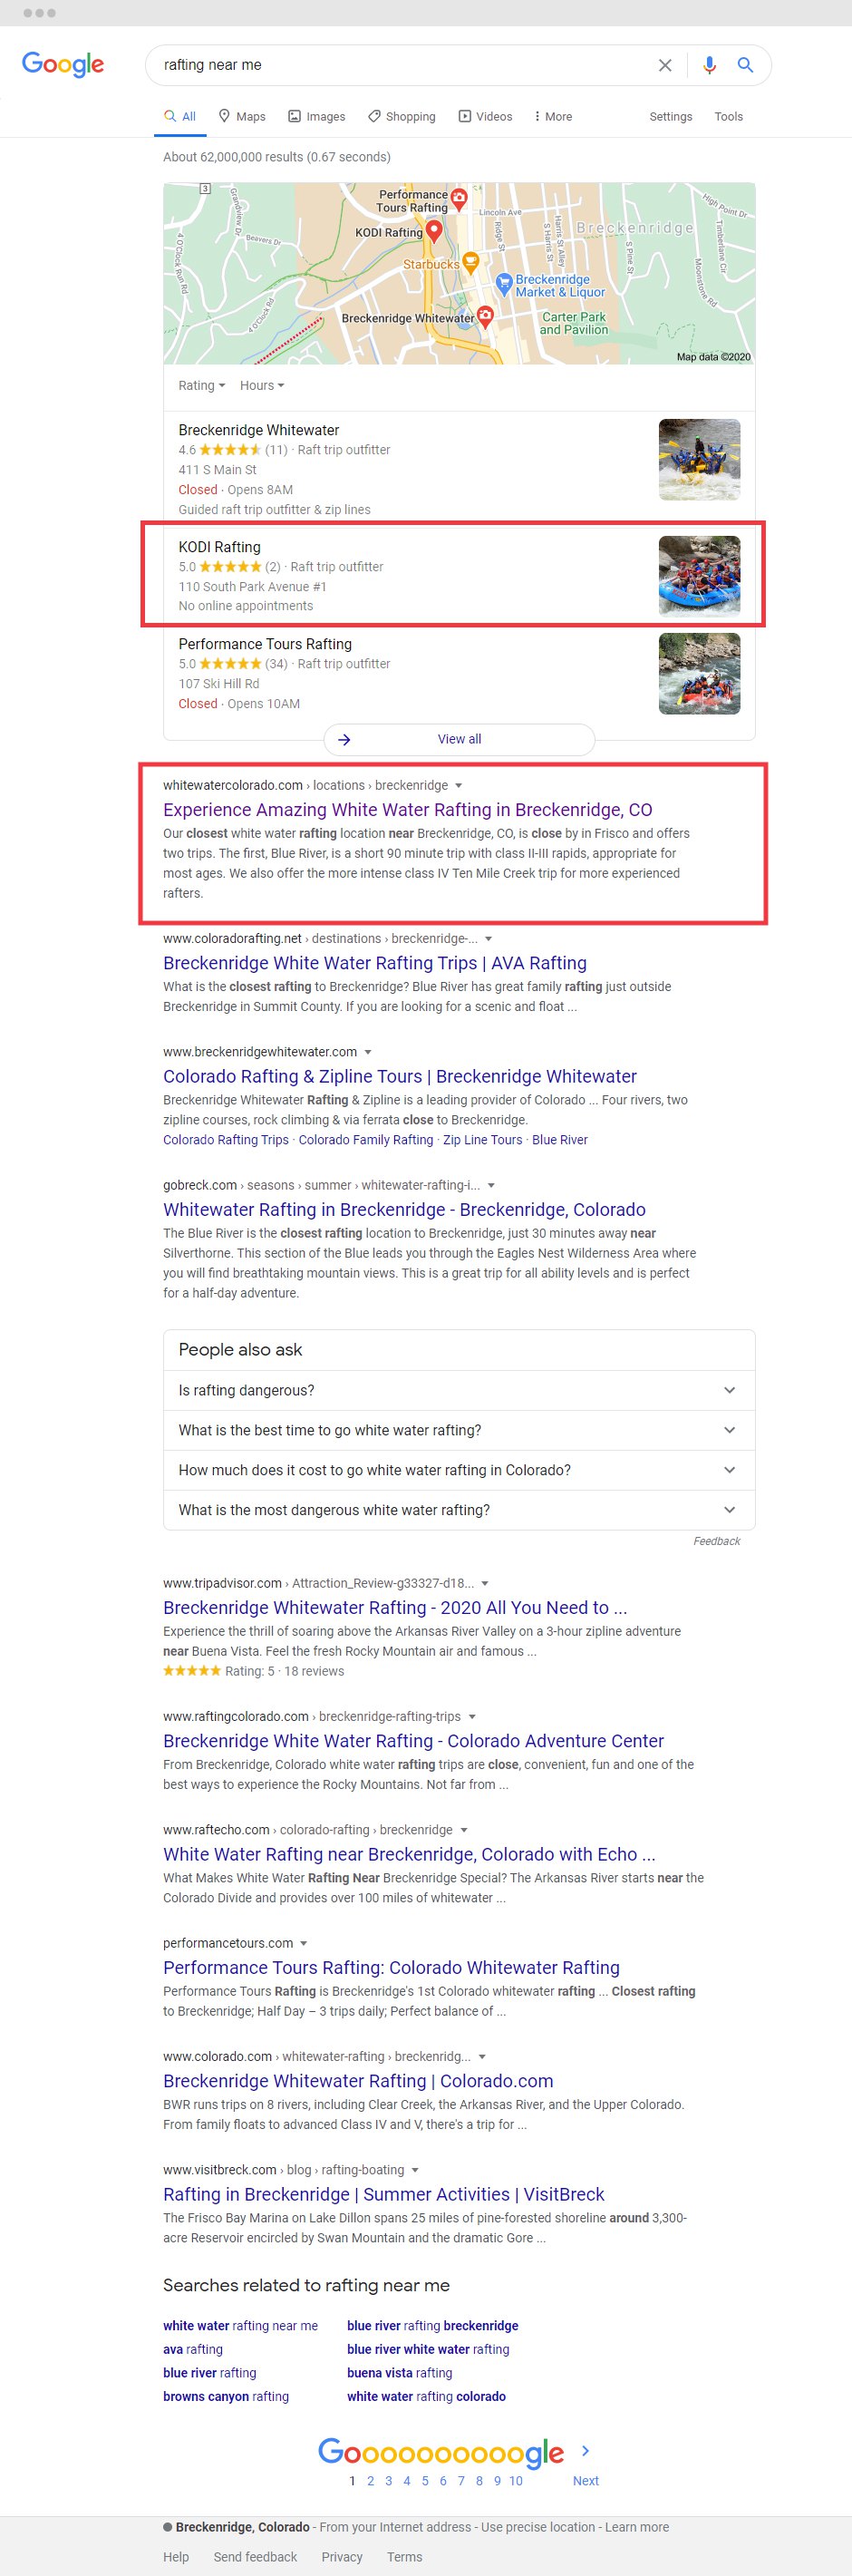 SERP screenshot for “rafting near me” query displaying our client in snippets and the top of search results